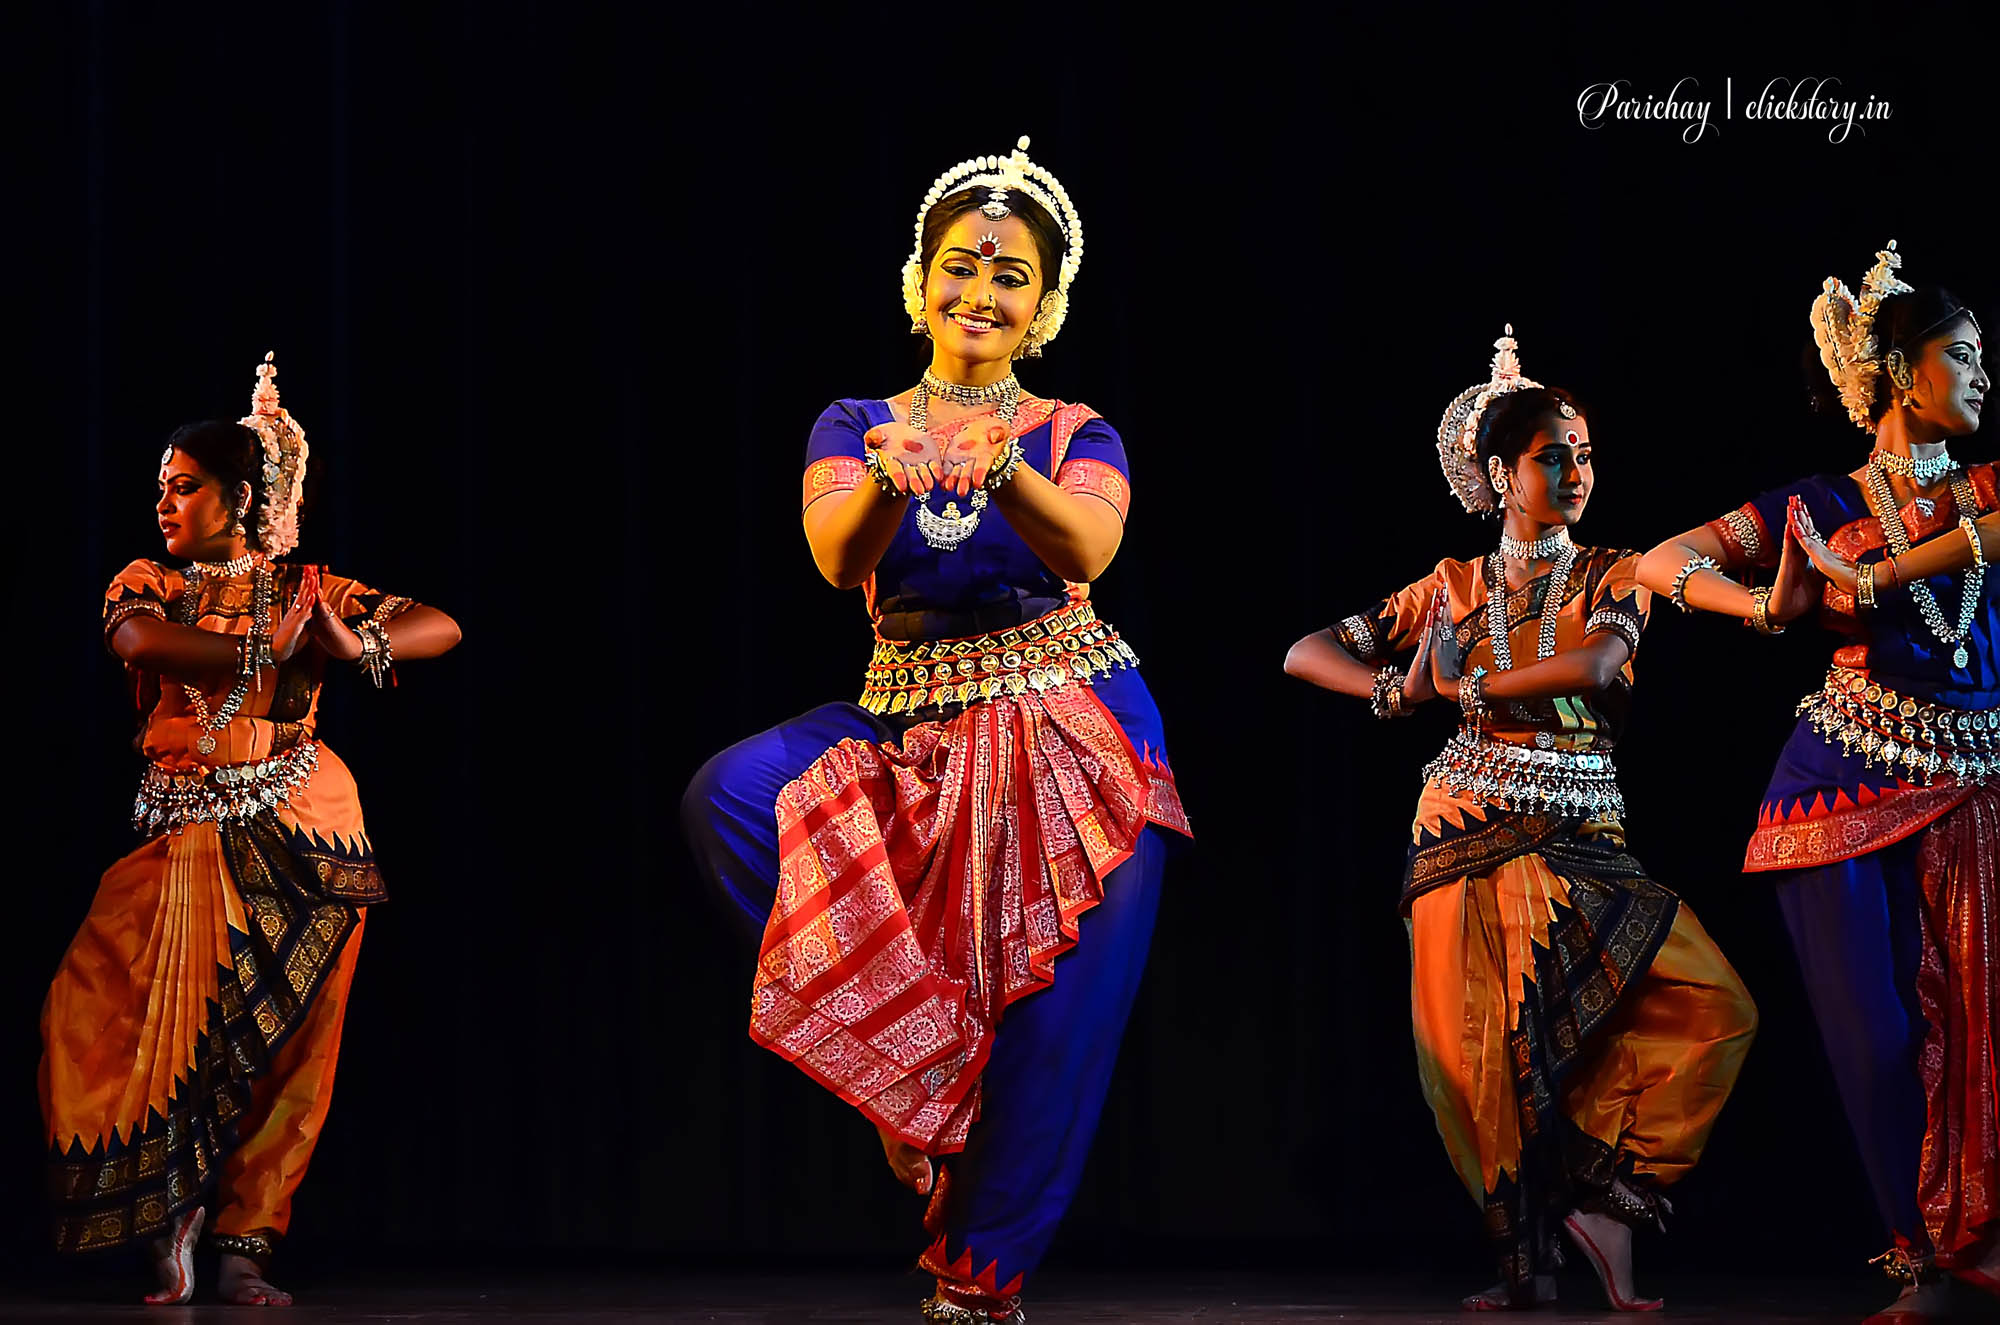 Kalpodip – A Tune Of Indian Classical Dance